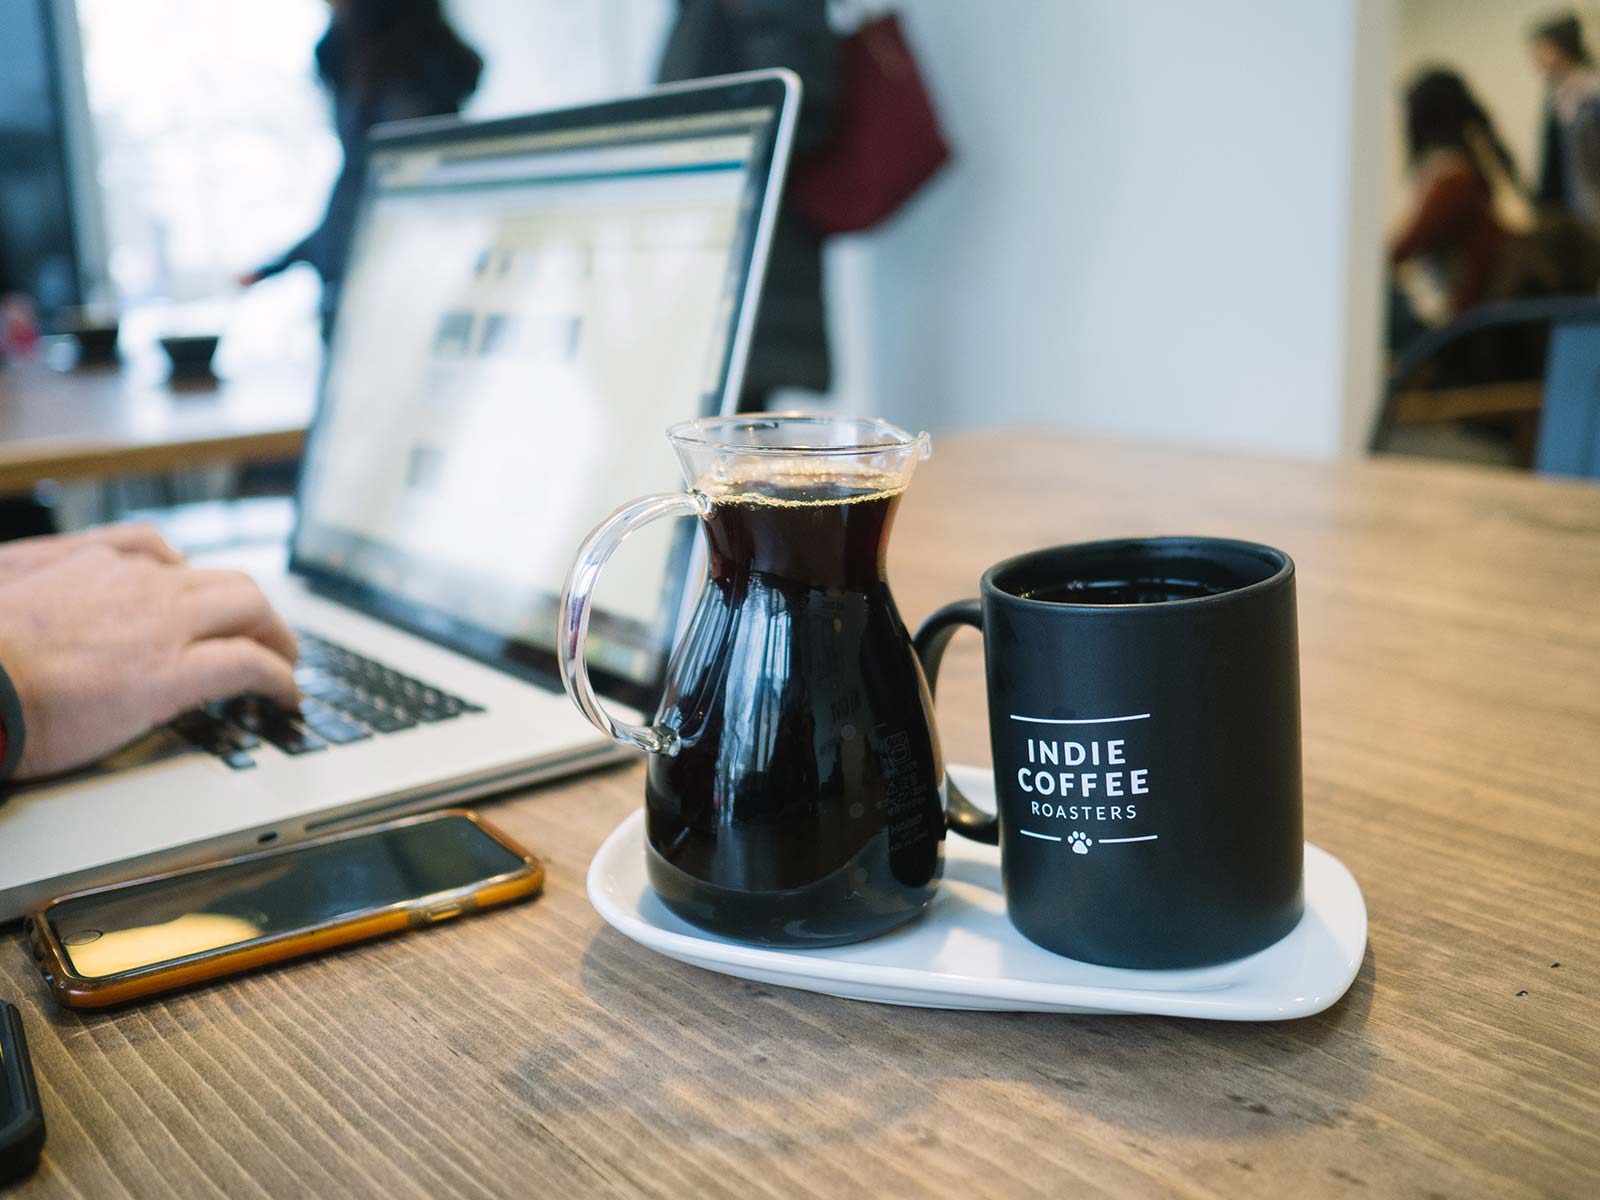 Indie Coffee Roasters - carafe of coffee next to a laptop